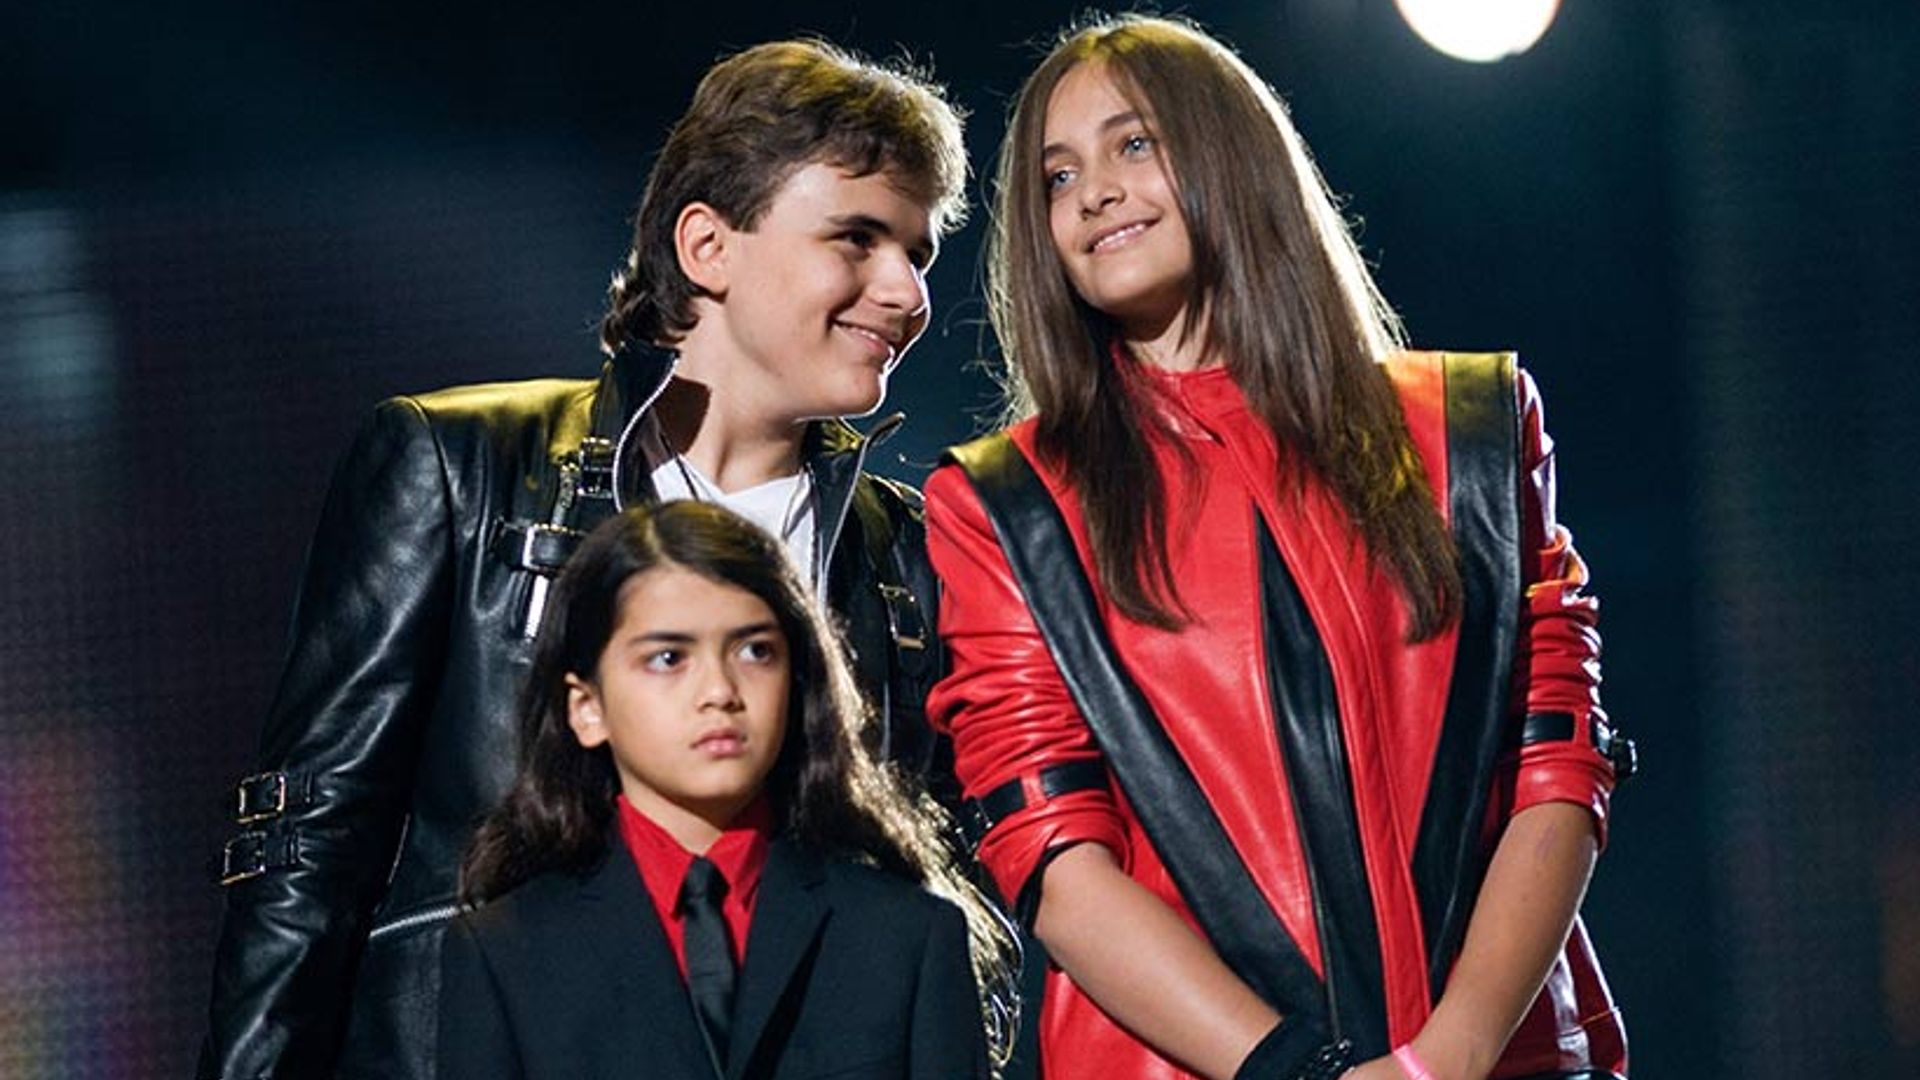 Michael Jackson's children now – what are they doing 15 years on from star's death